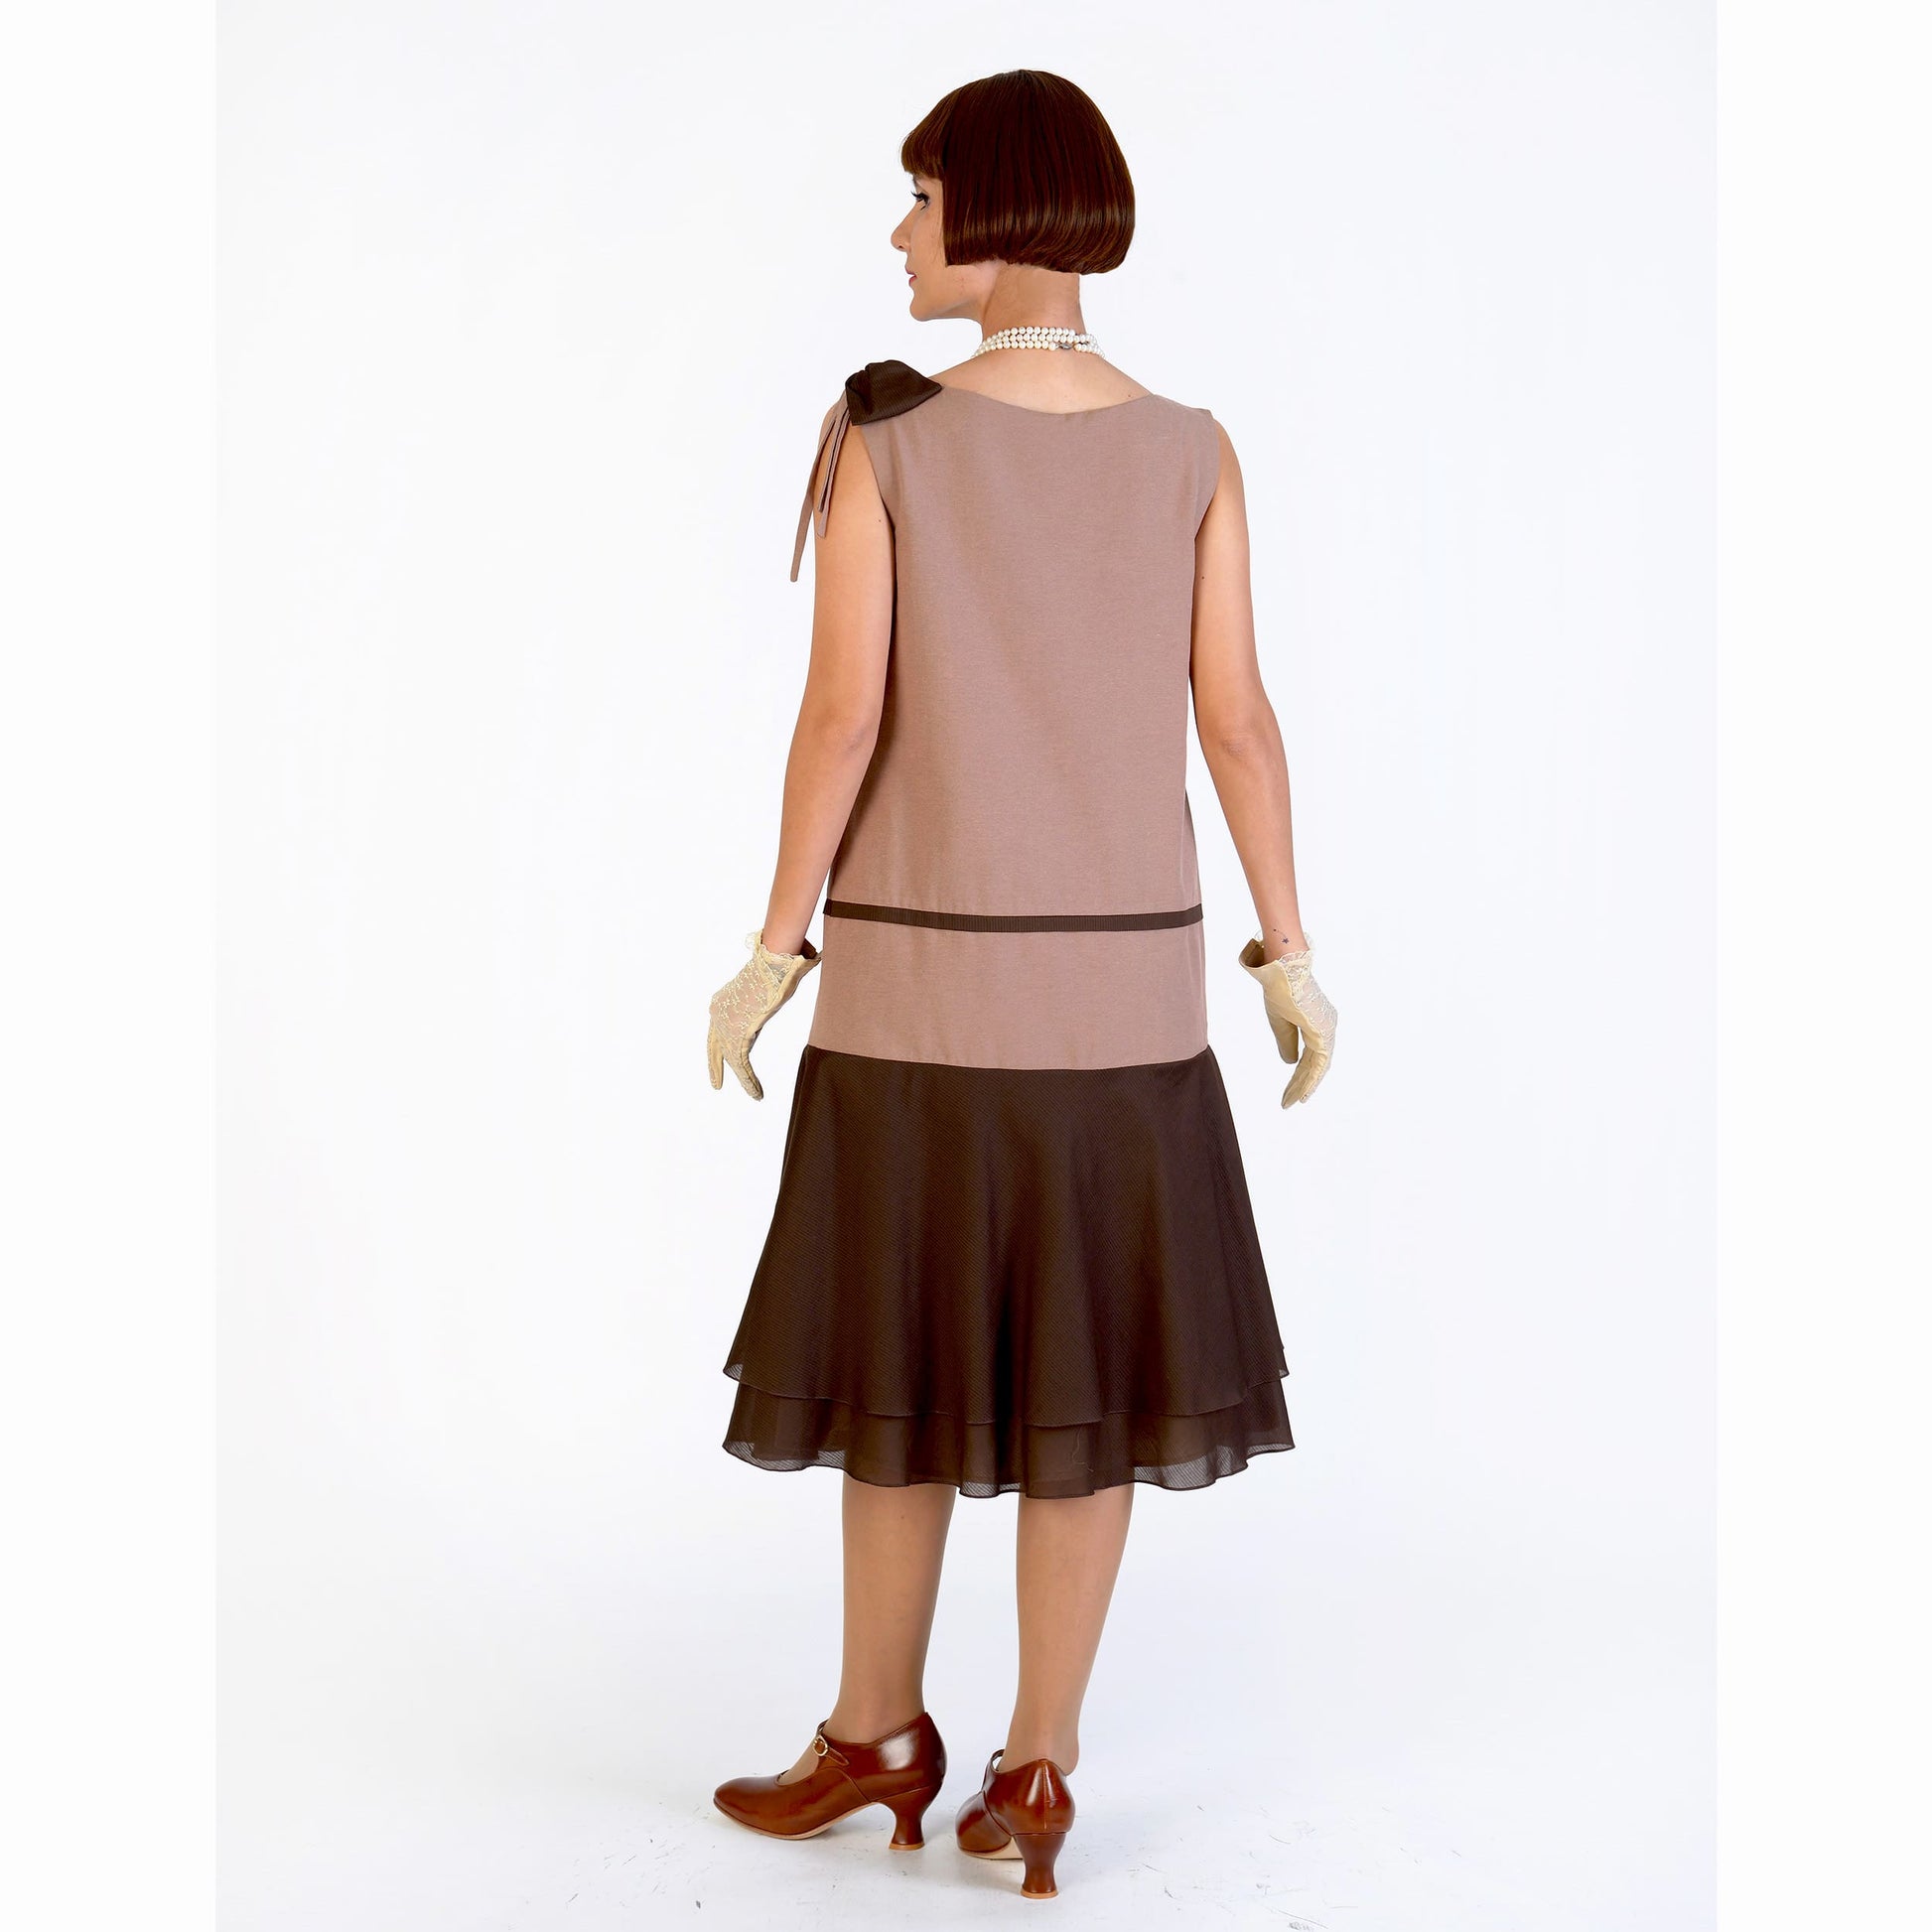 Light brown cotton 1920s dress with dark brown cotton voile. The 1920s fashion dress can be worn as Great Gatsby dress or Lady Mary dress.  